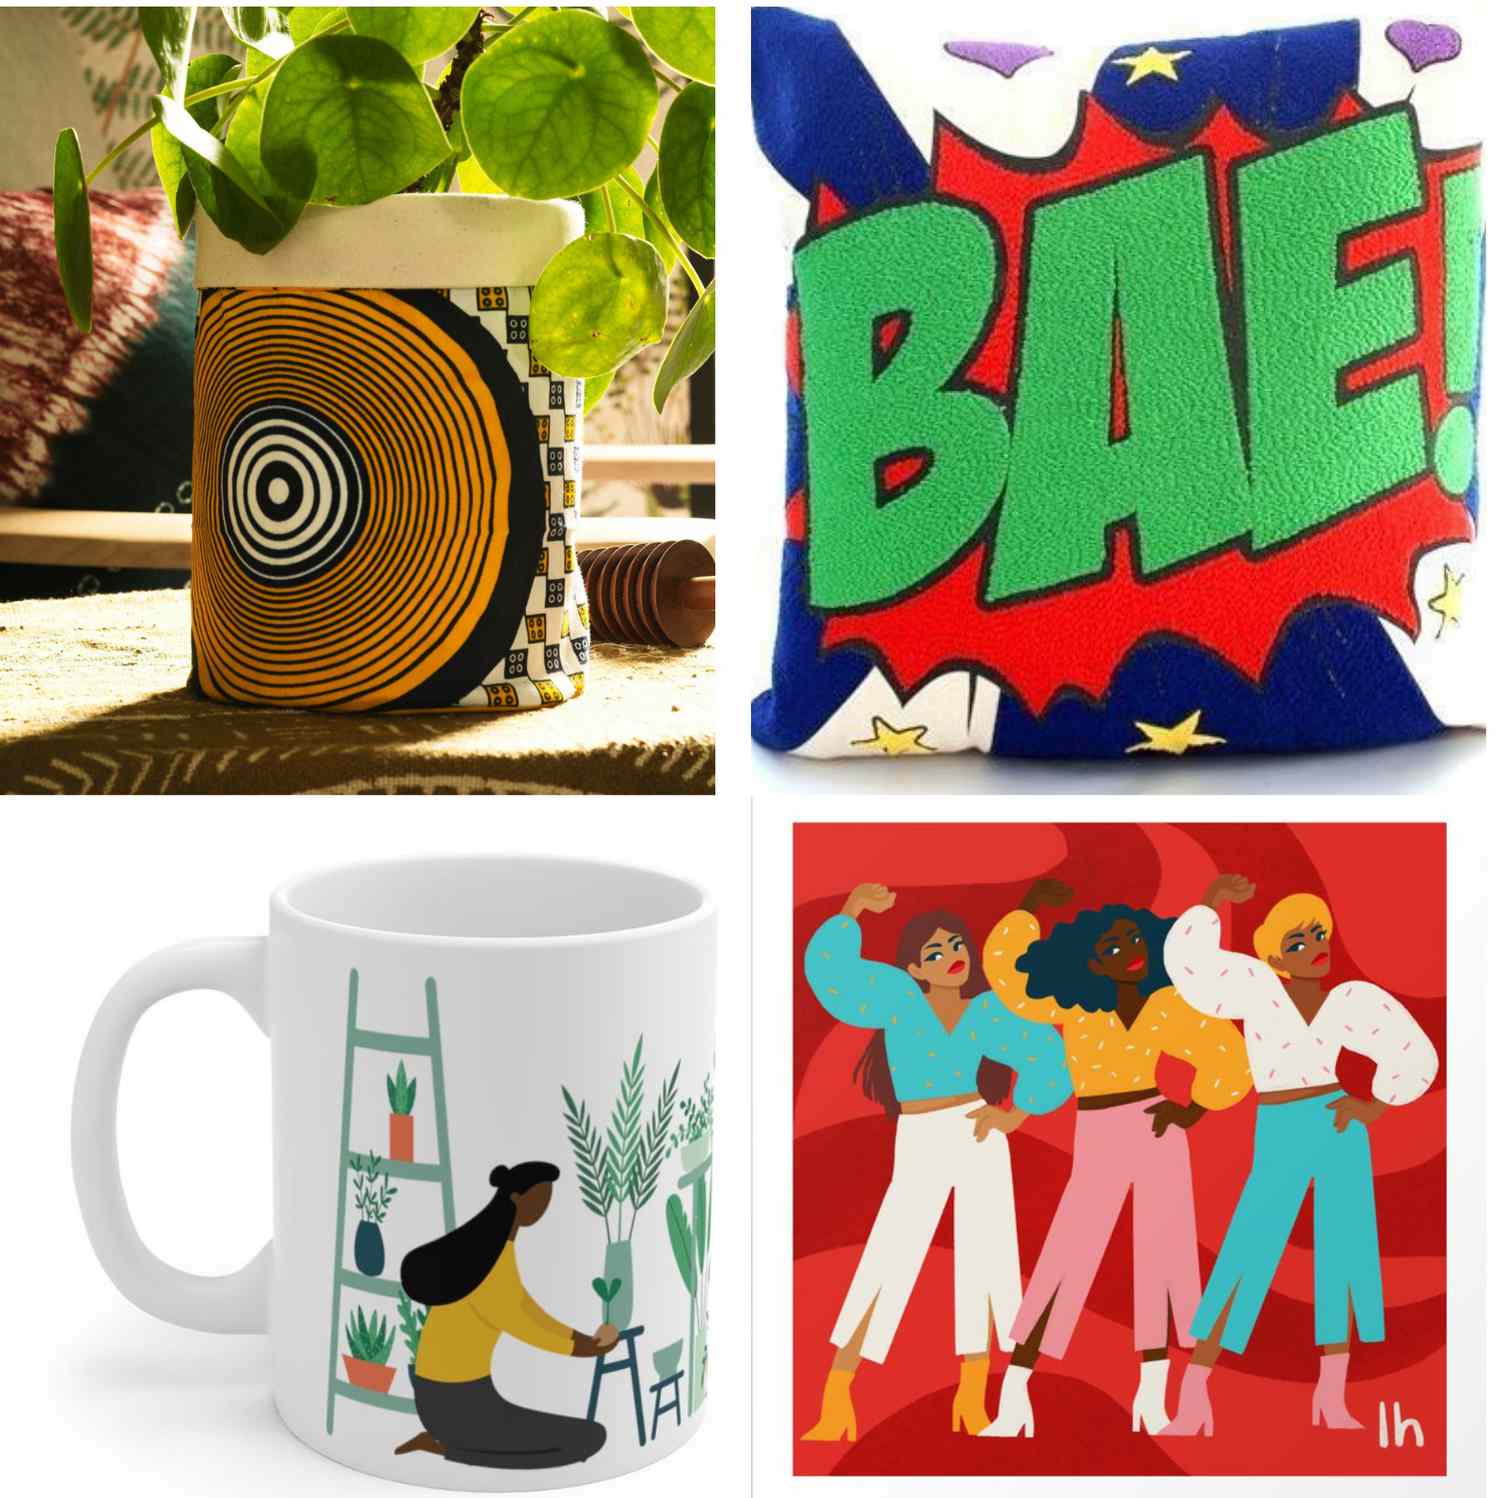 gift ideas from Black-owned businesses, including canvas pot, bae pillow cover, plant-lover's mug, ladies' night print